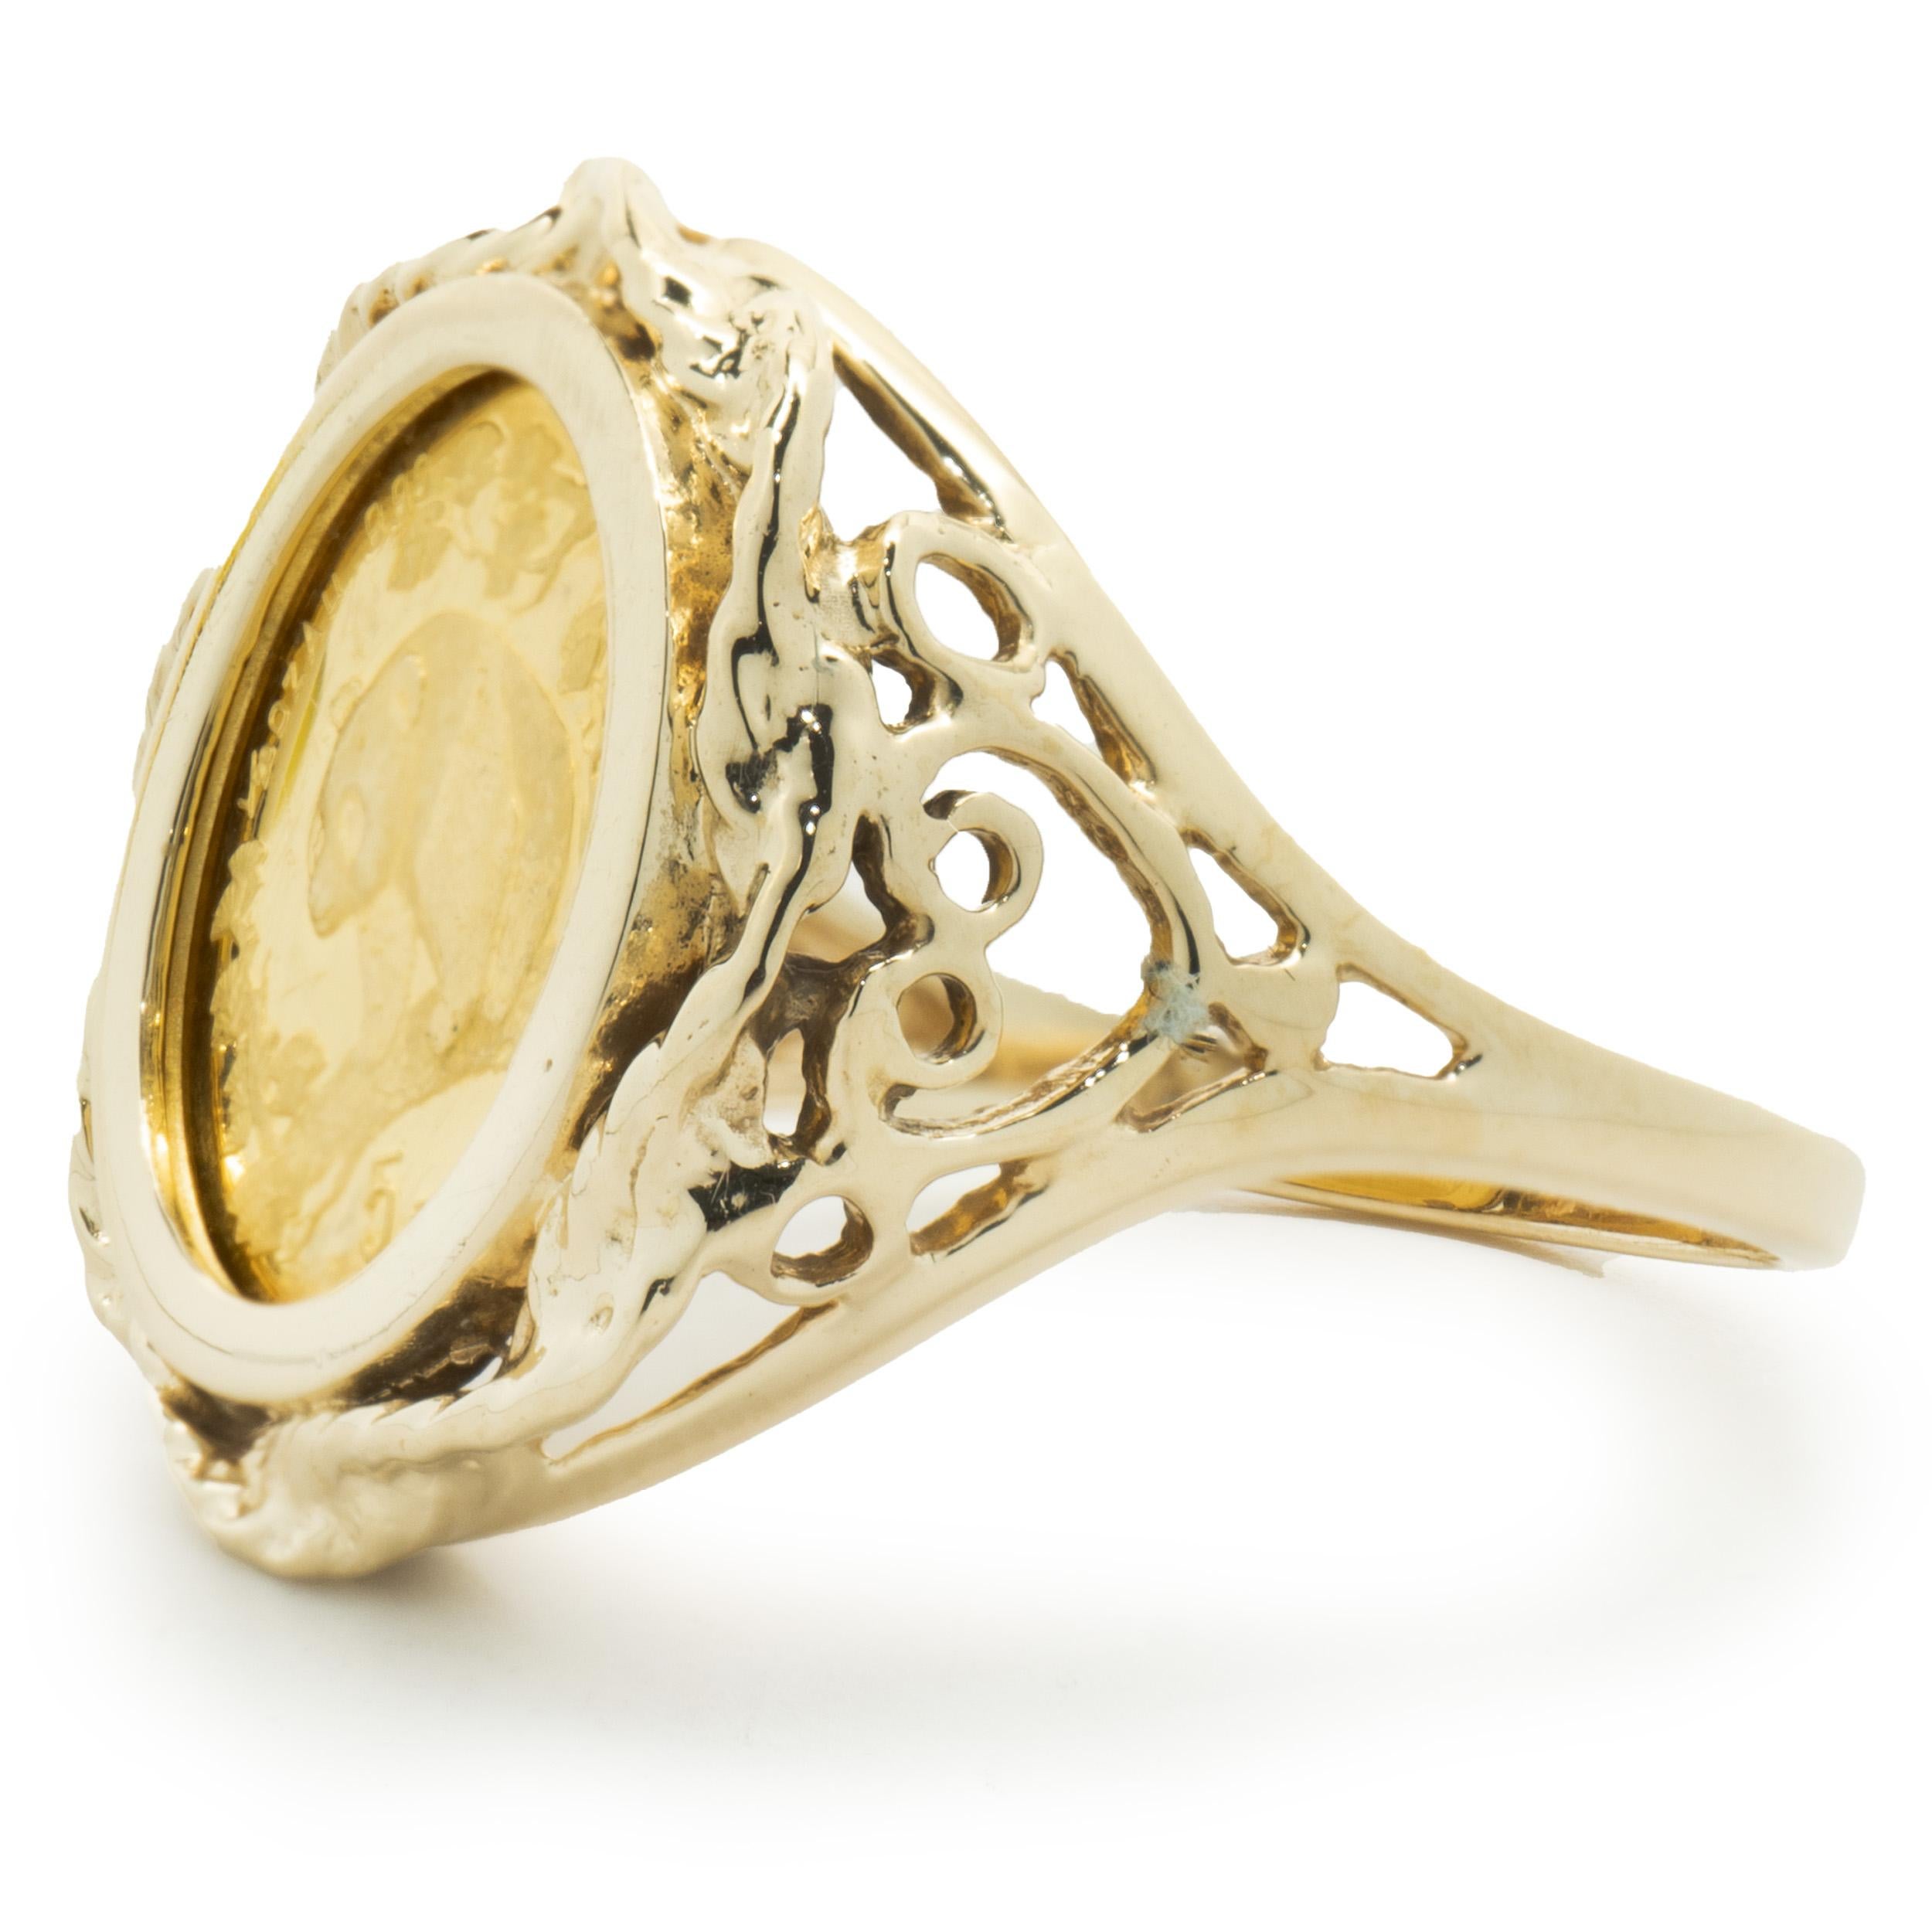 Designer: custom
Material: 14K yellow gold 
Dimensions: ring measures 18.50mm wide
Size: 6.5
Weight: 5.40 grams